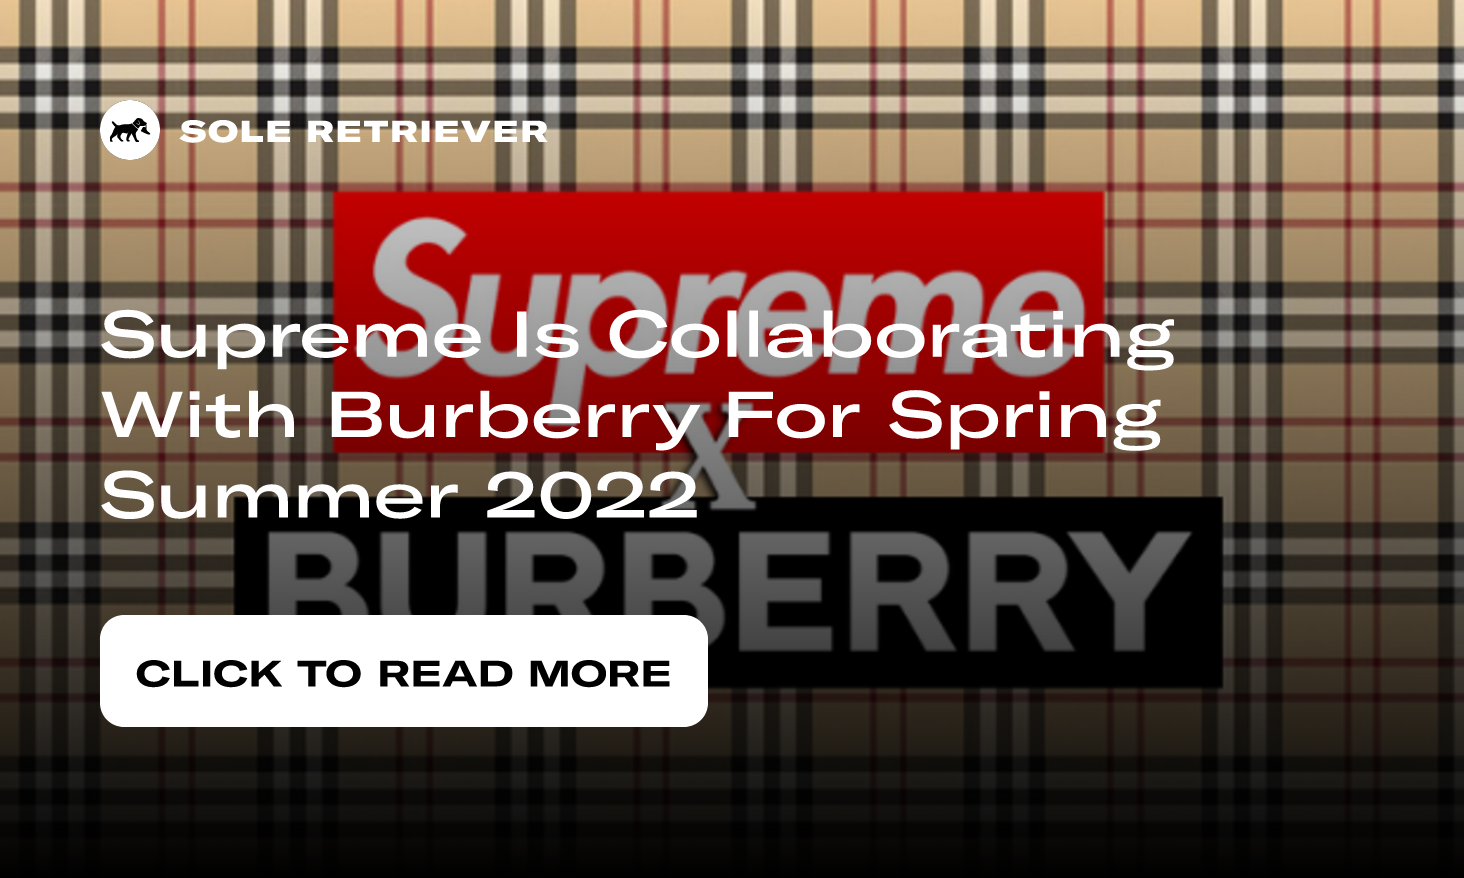 Supreme collaborates with Burberry for its Spring 2022 Collection